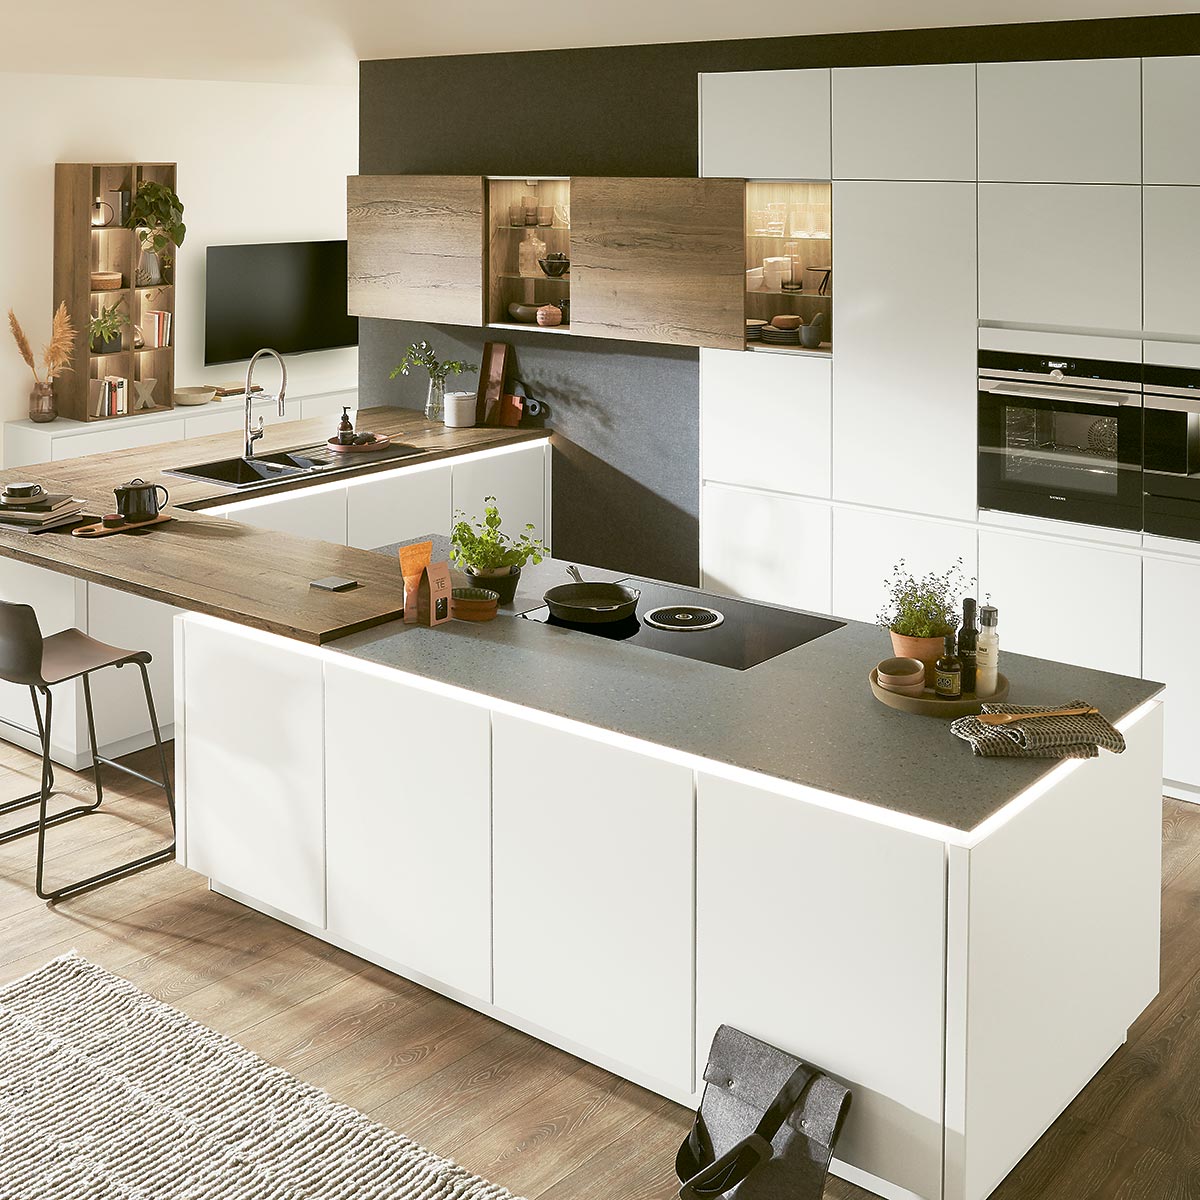 Modern kitchens with quality promise